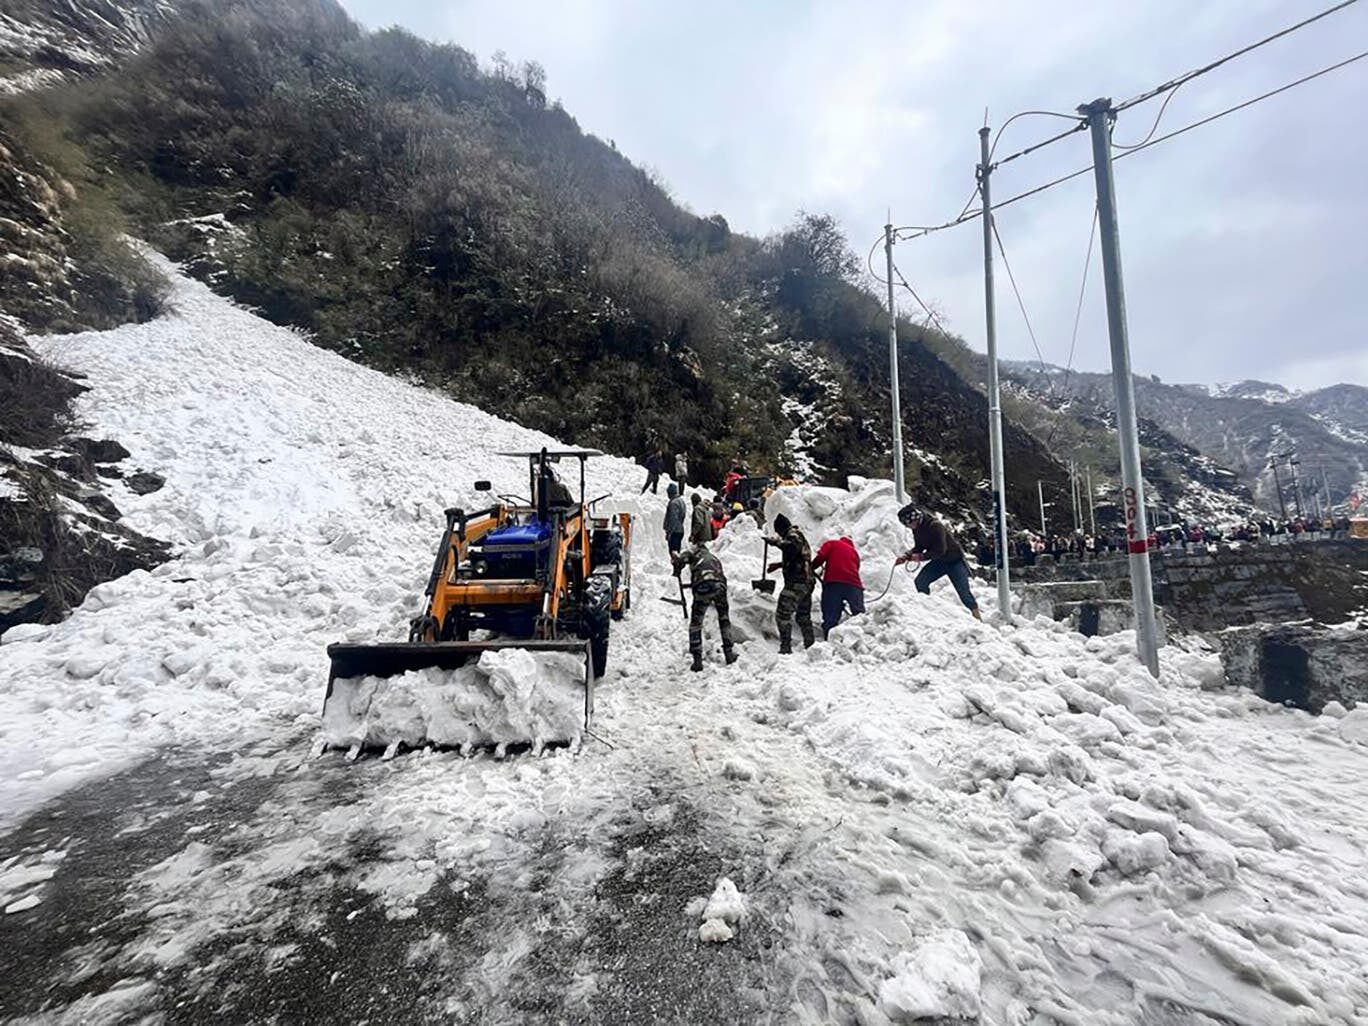 In this handout photo released by the Indian Army, soldiers clear snow from an avalanche near Nathu La mountain pass in India’s Sikkim state on 4 April